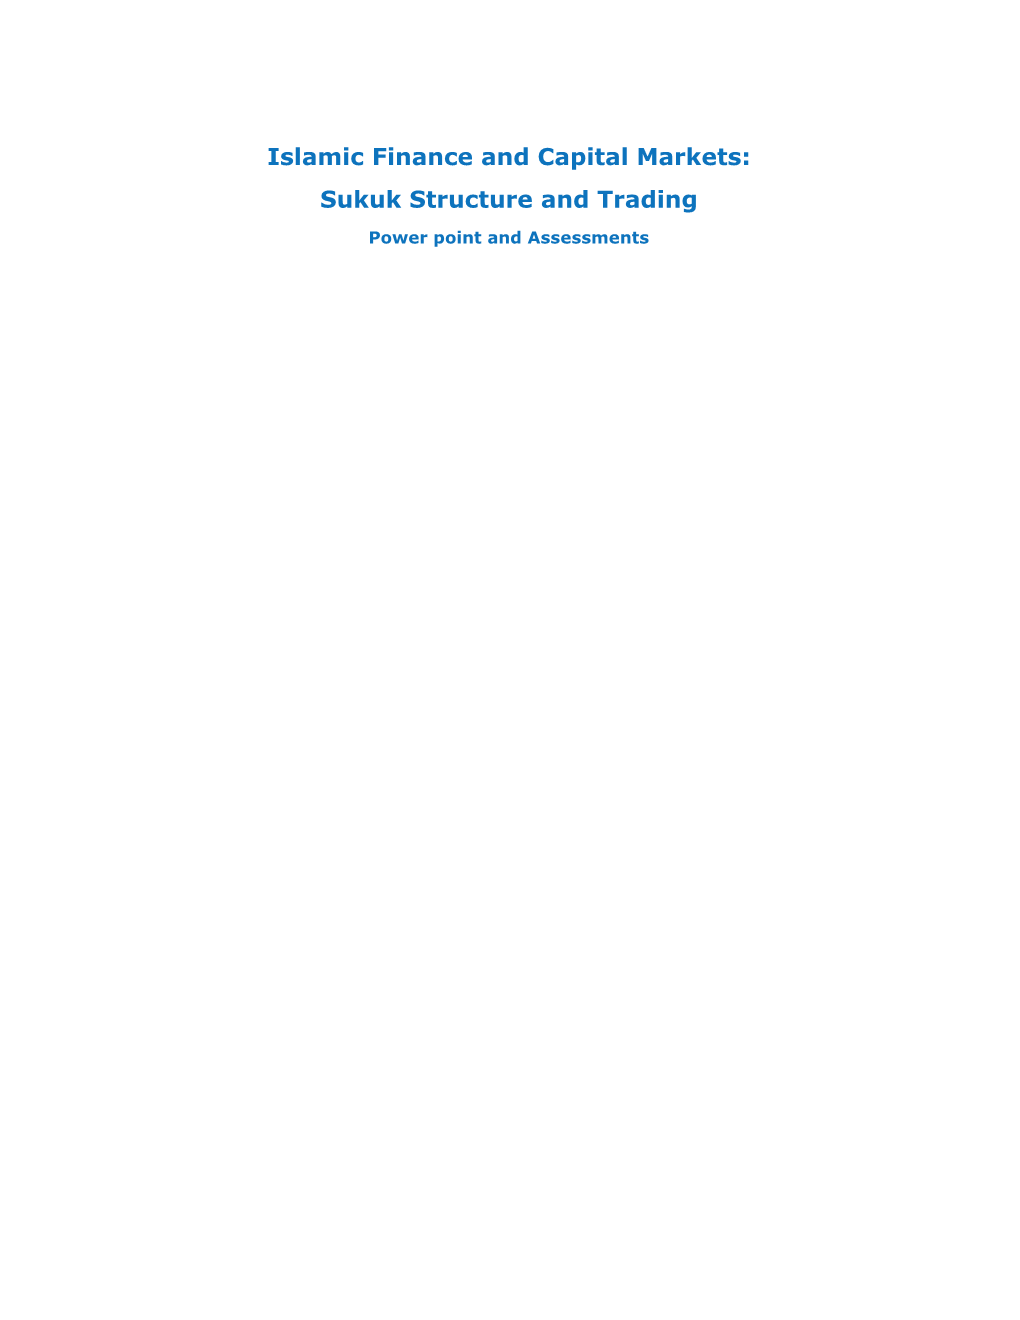 Islamic Finance and Capital Markets: Sukuk Structure and Trading